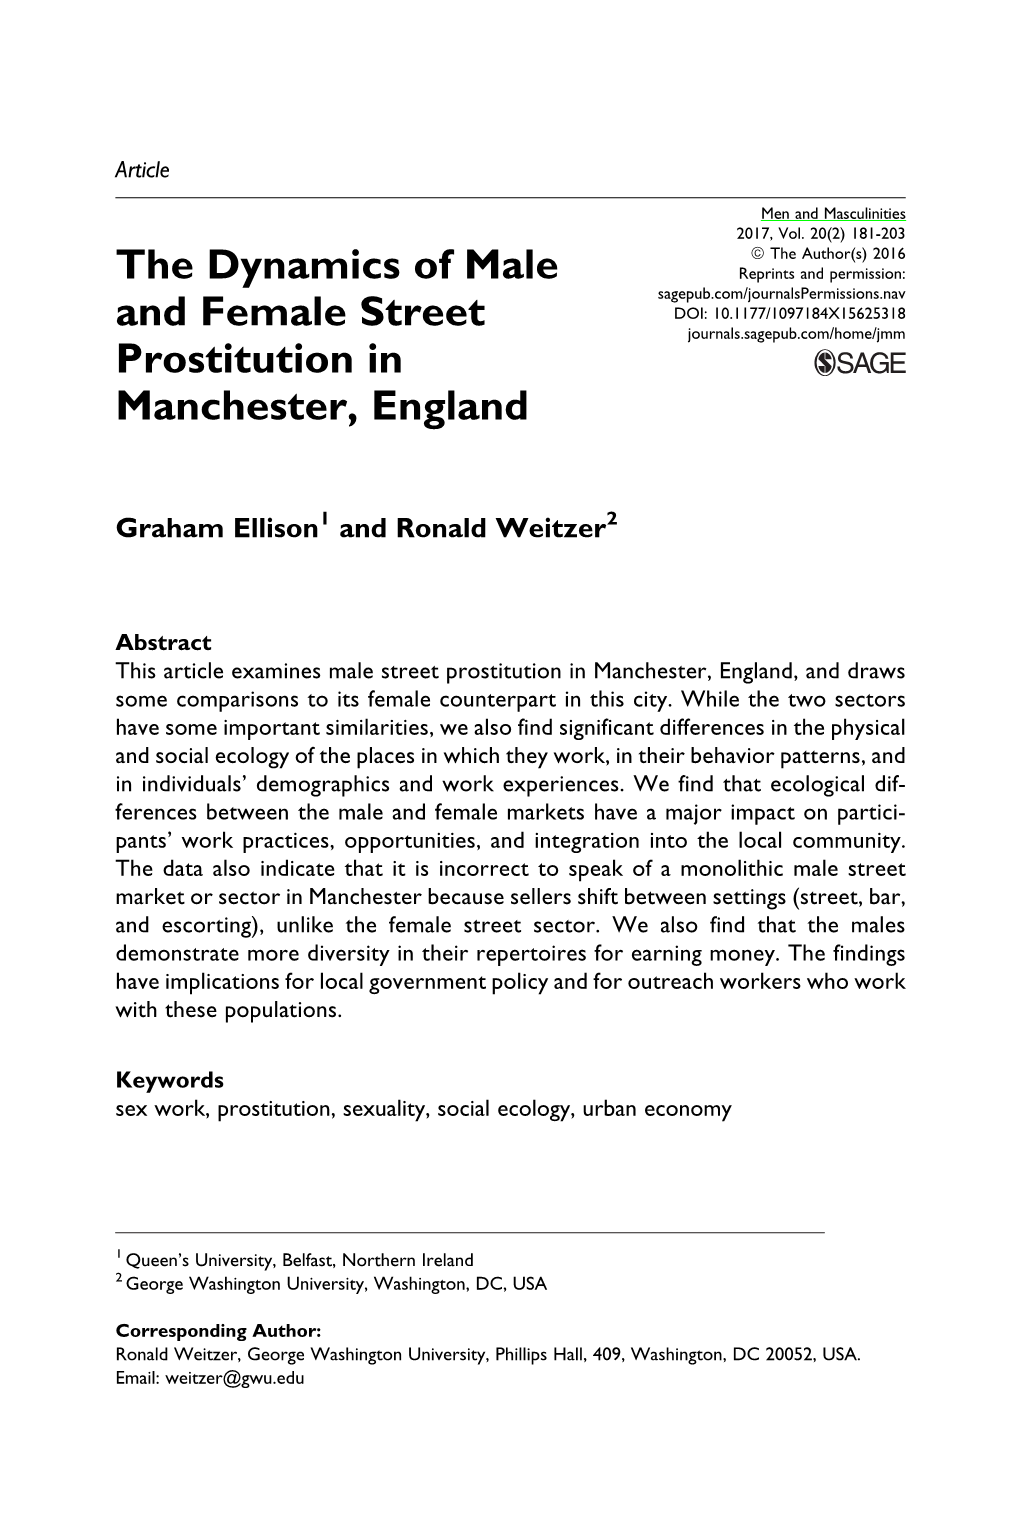 The Dynamics of Male and Female Street Prostitution in Manchester, England